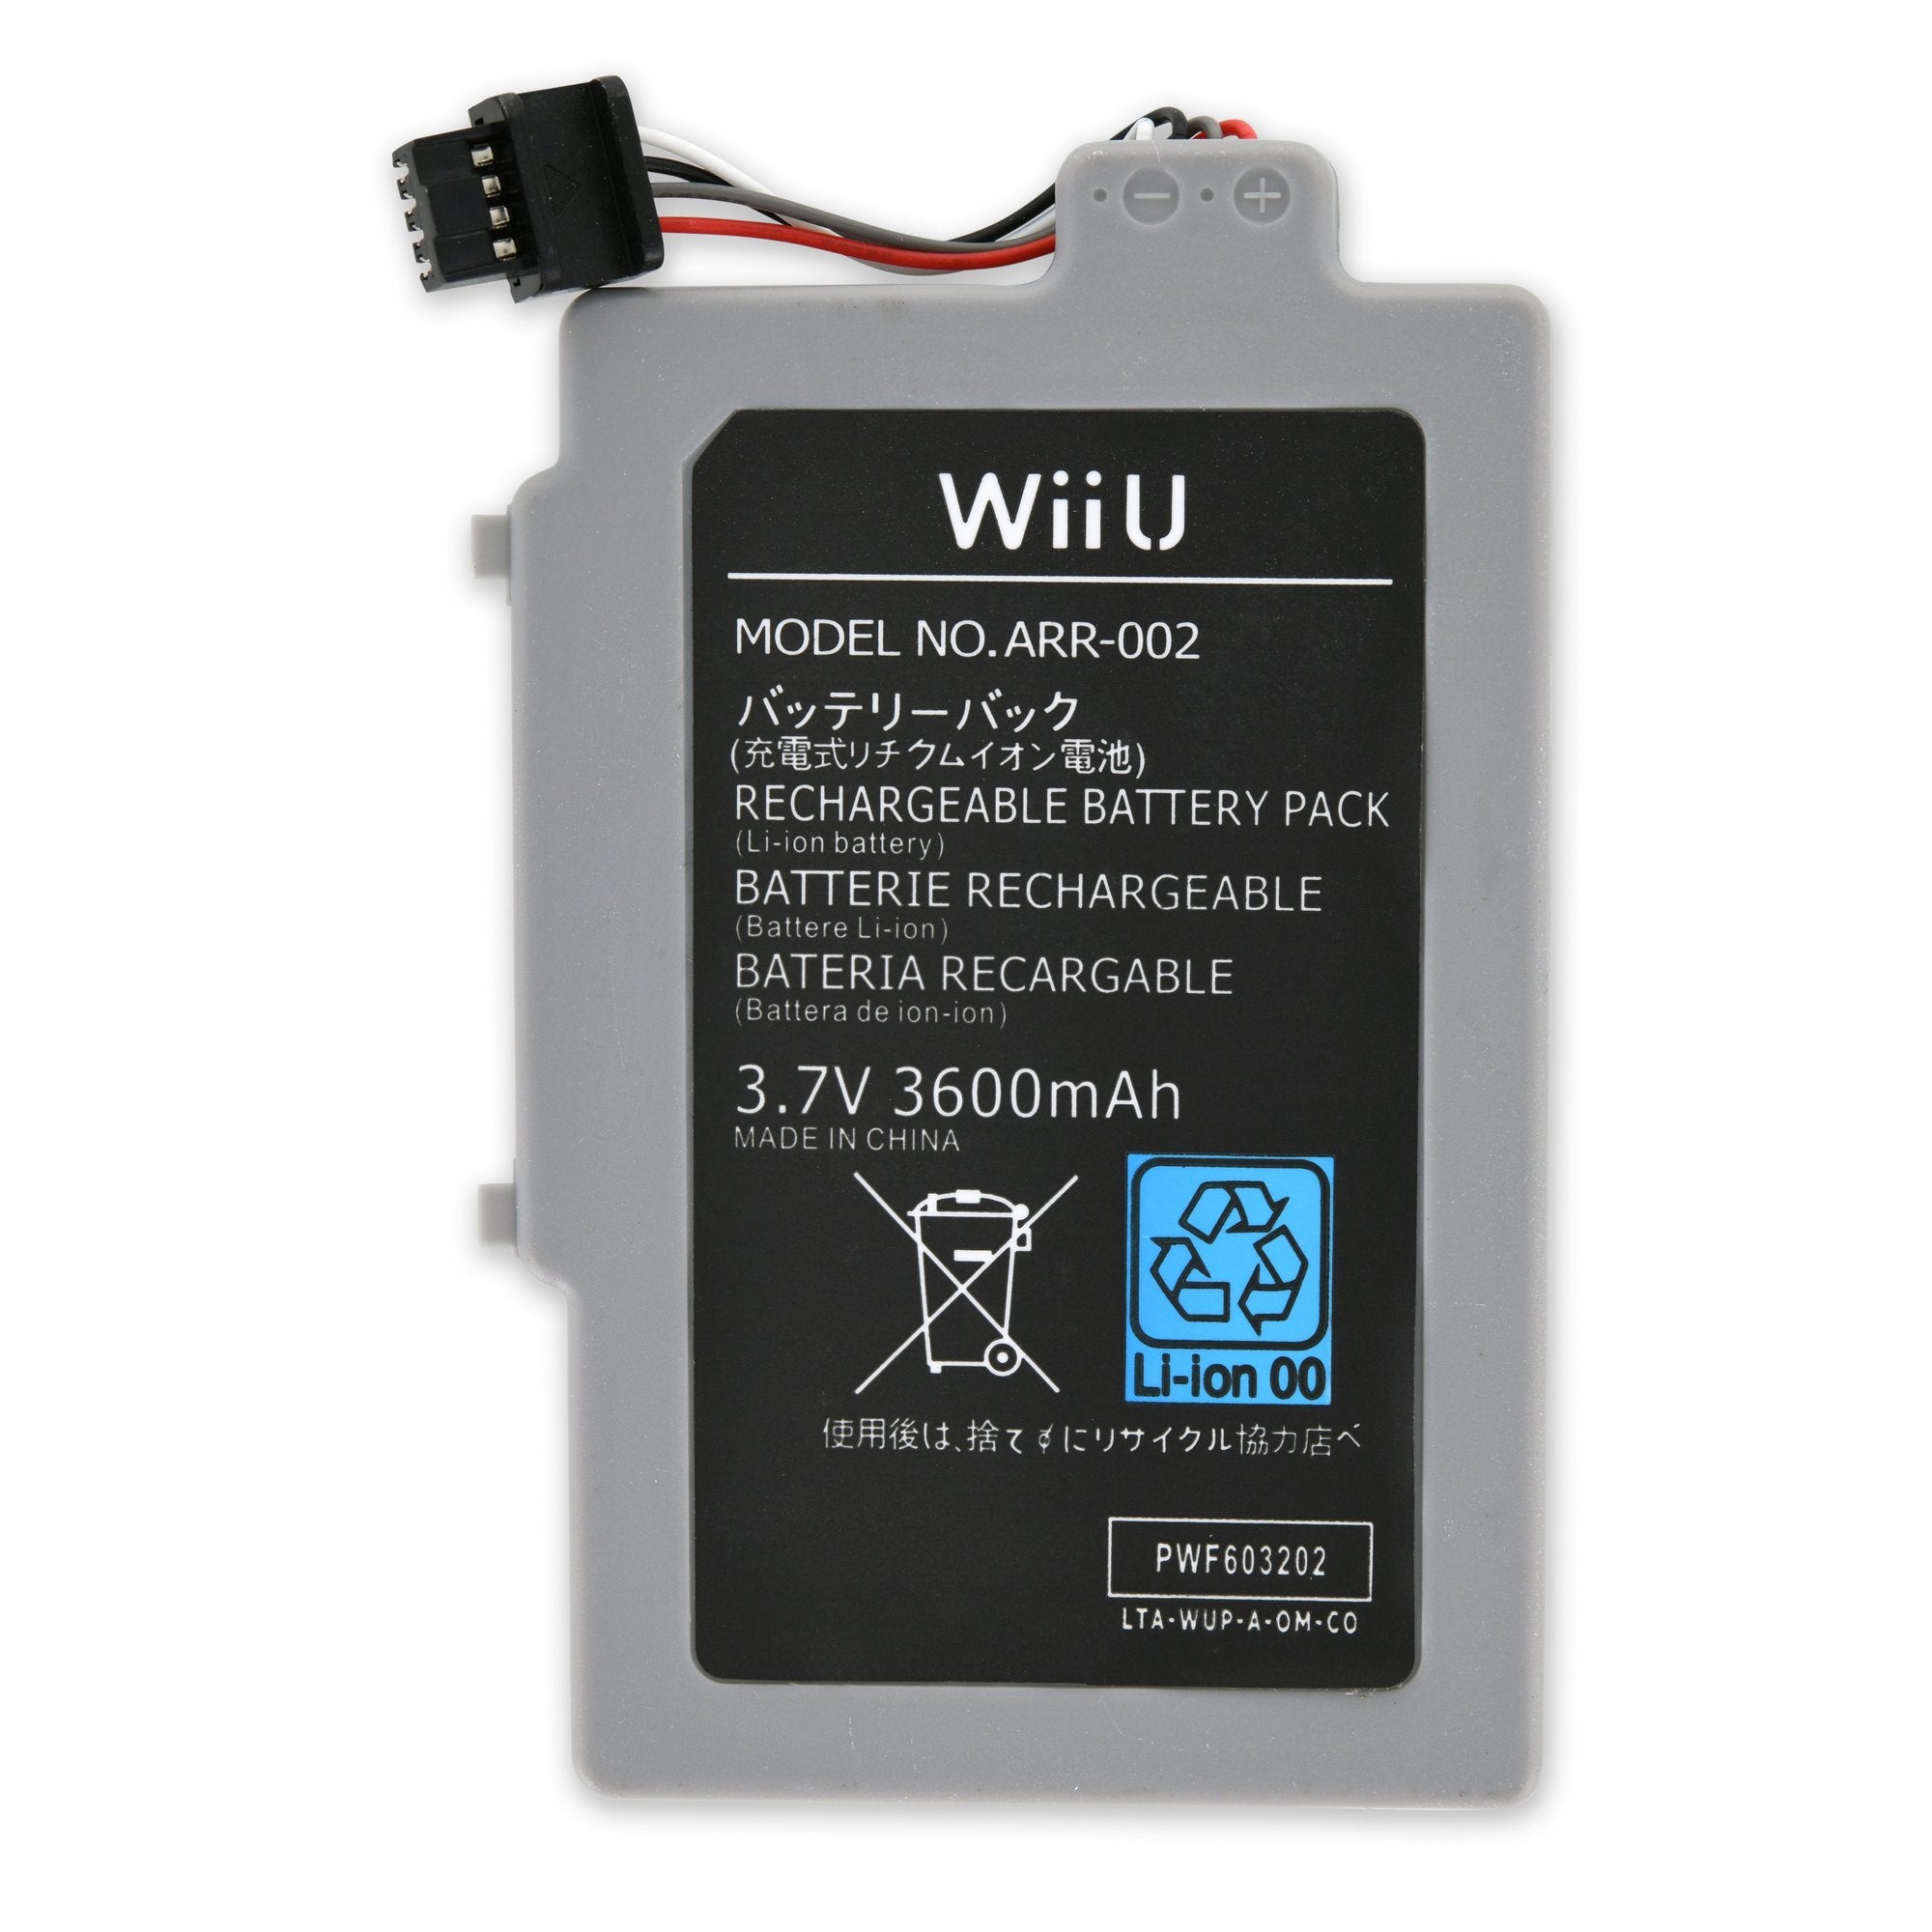 6600mAh High Capacity Battery for Nintendo Wii U Gamepad Rechargeable Long  Lasting Battery, Fix Dead Power